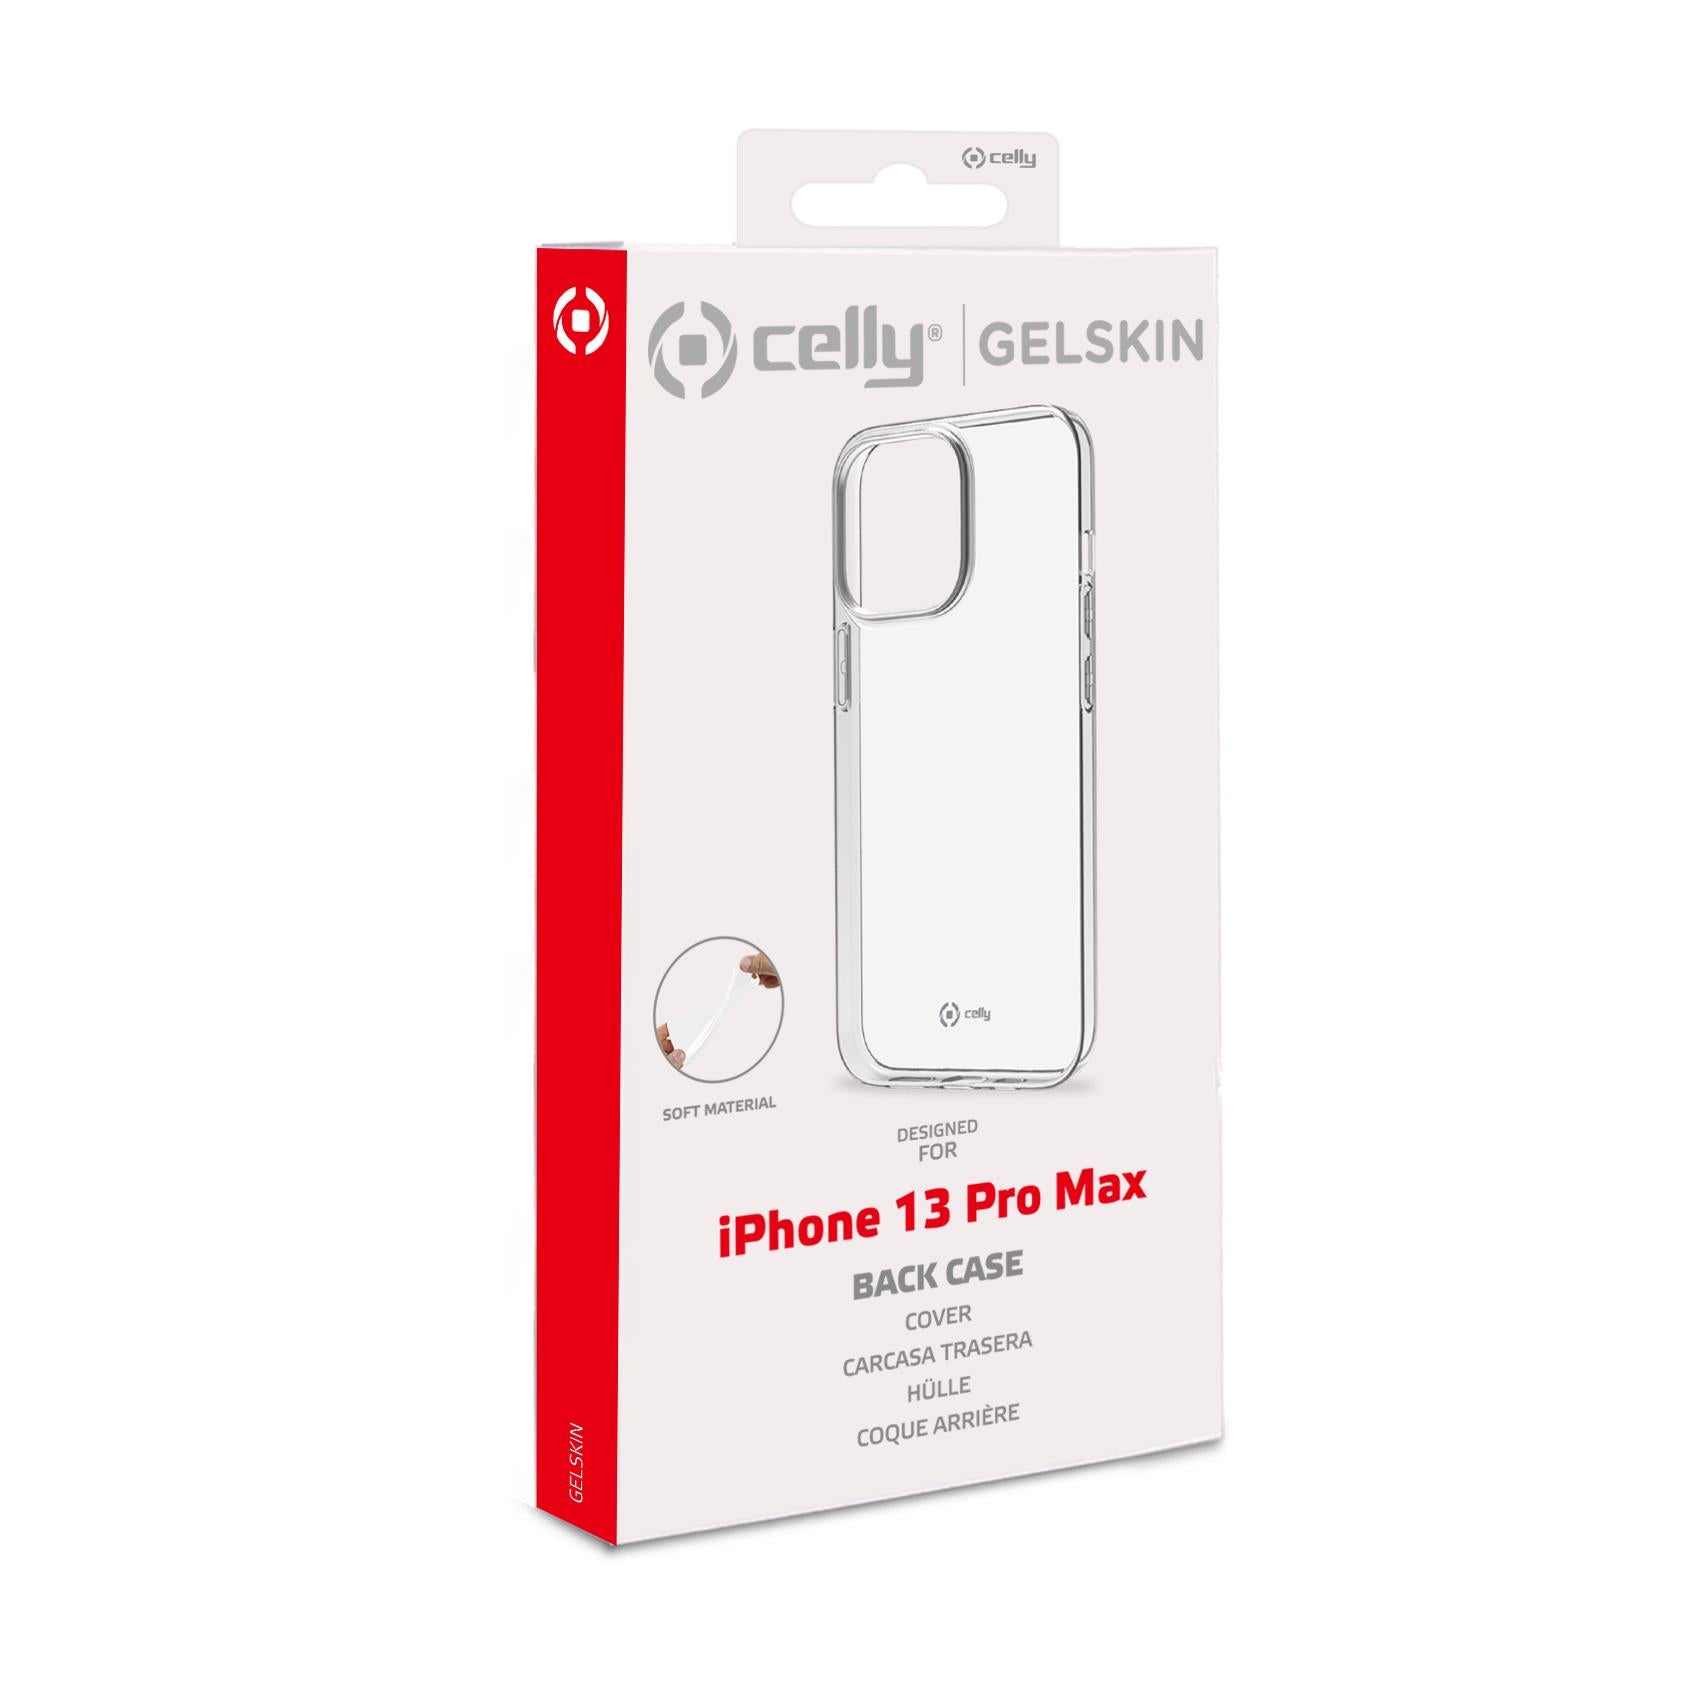 Celly GELSKIN TPU COVER IPHONE 13 PRO MAX